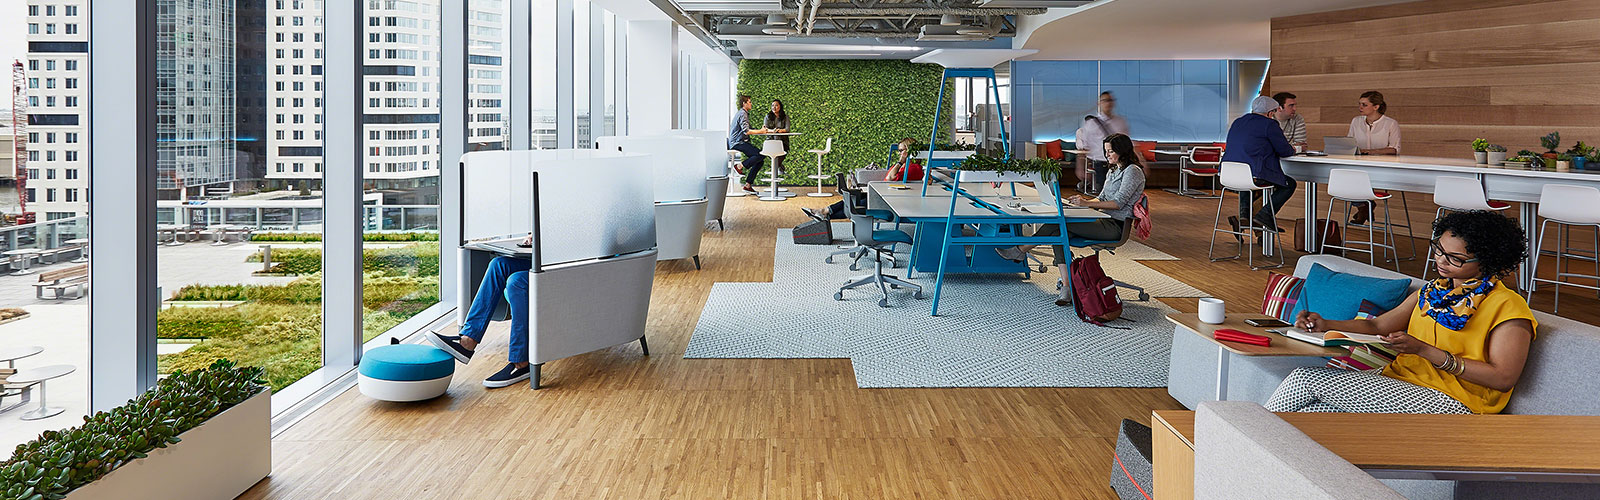 Collaborative workspaces and breakout areas are a great way to inspire creative and boost productivity. Consider including these in your office fit out project